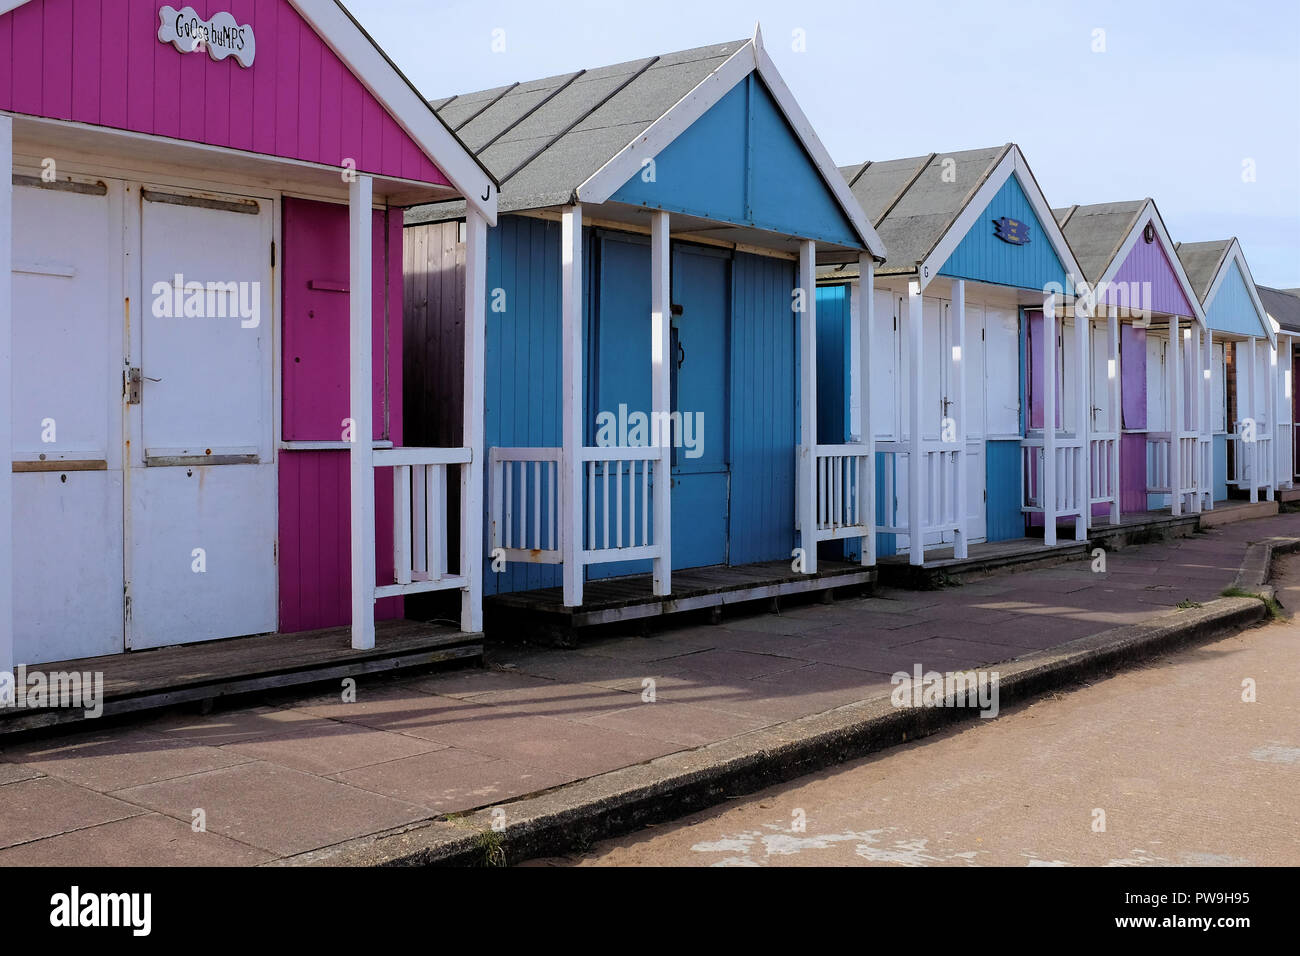 Sutton on Sea, Lincolnshire, UK.  October 07, 2018.  A selected part of a row of beach huts on the Promenade at Sutton on Sea in Lincolnshire, UK. Stock Photo